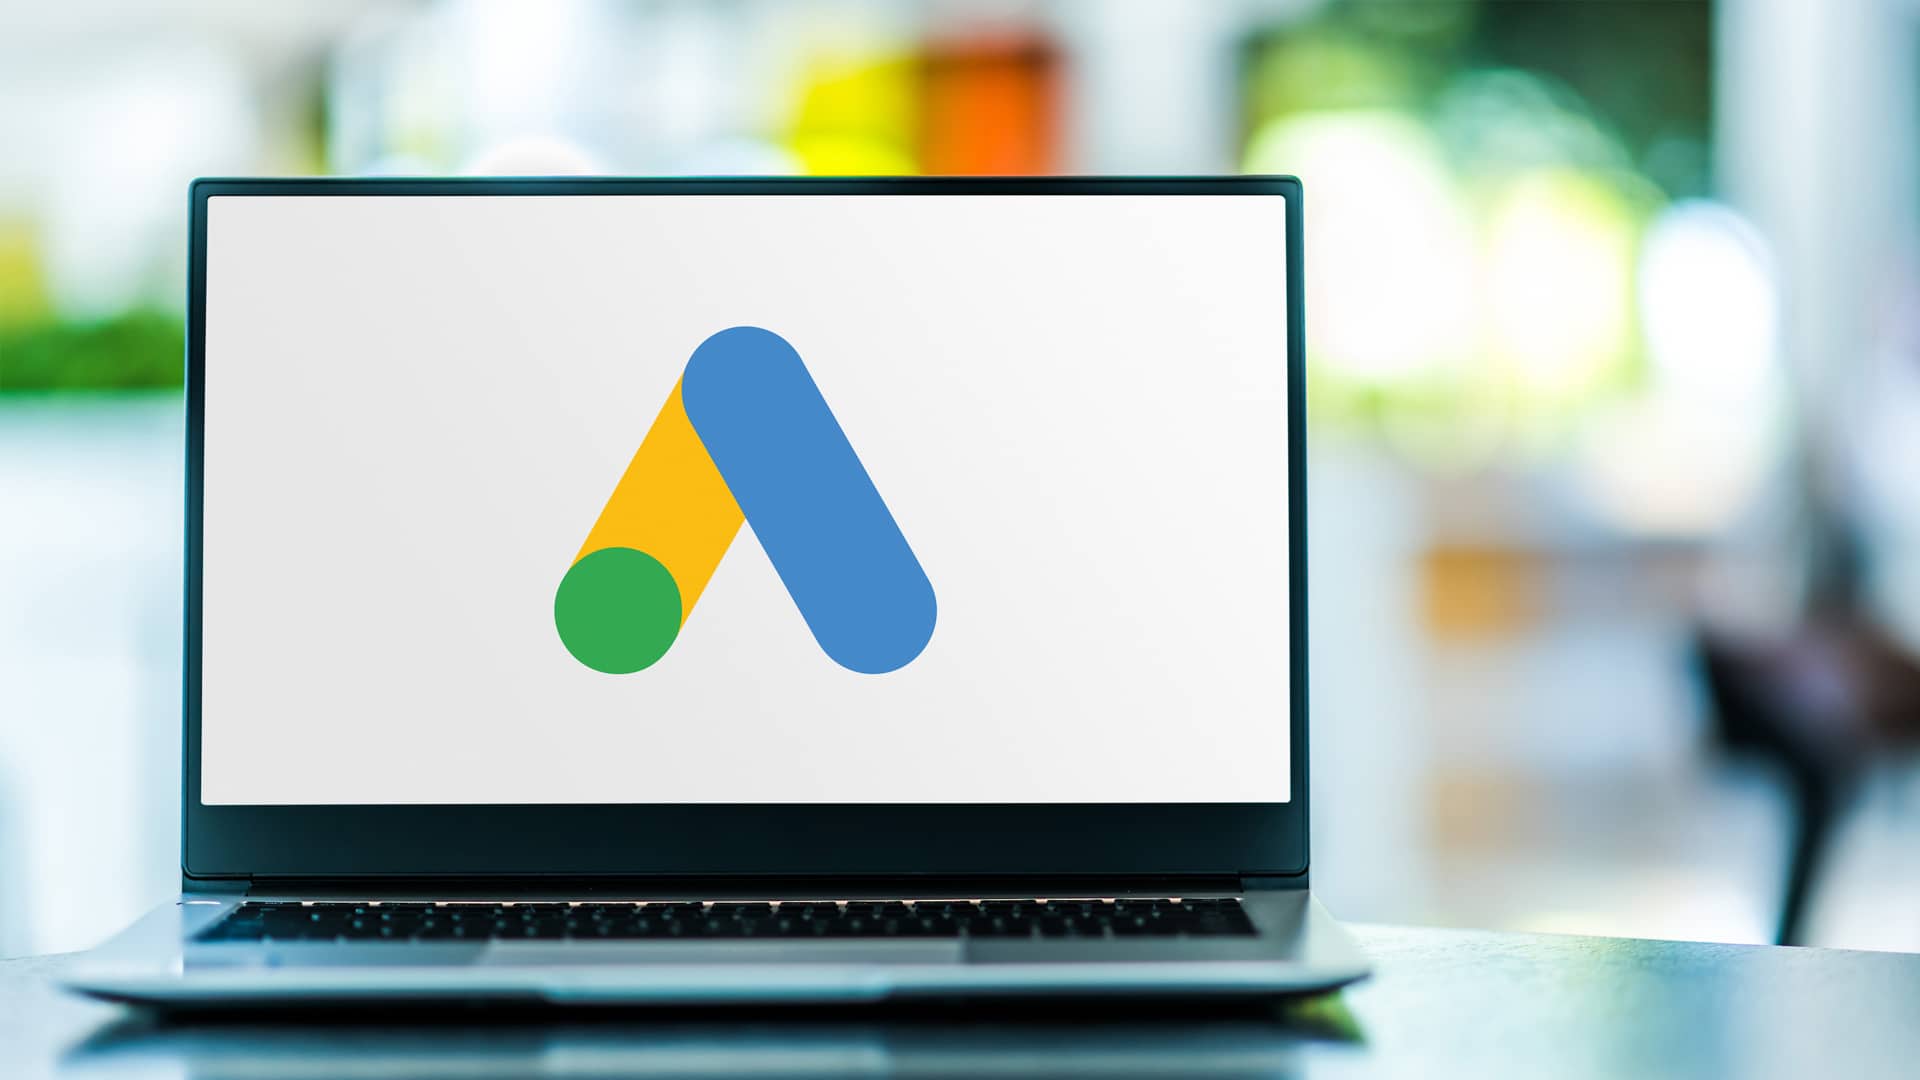 Google Ads introduces auto-generated advertisement tool using generative AI